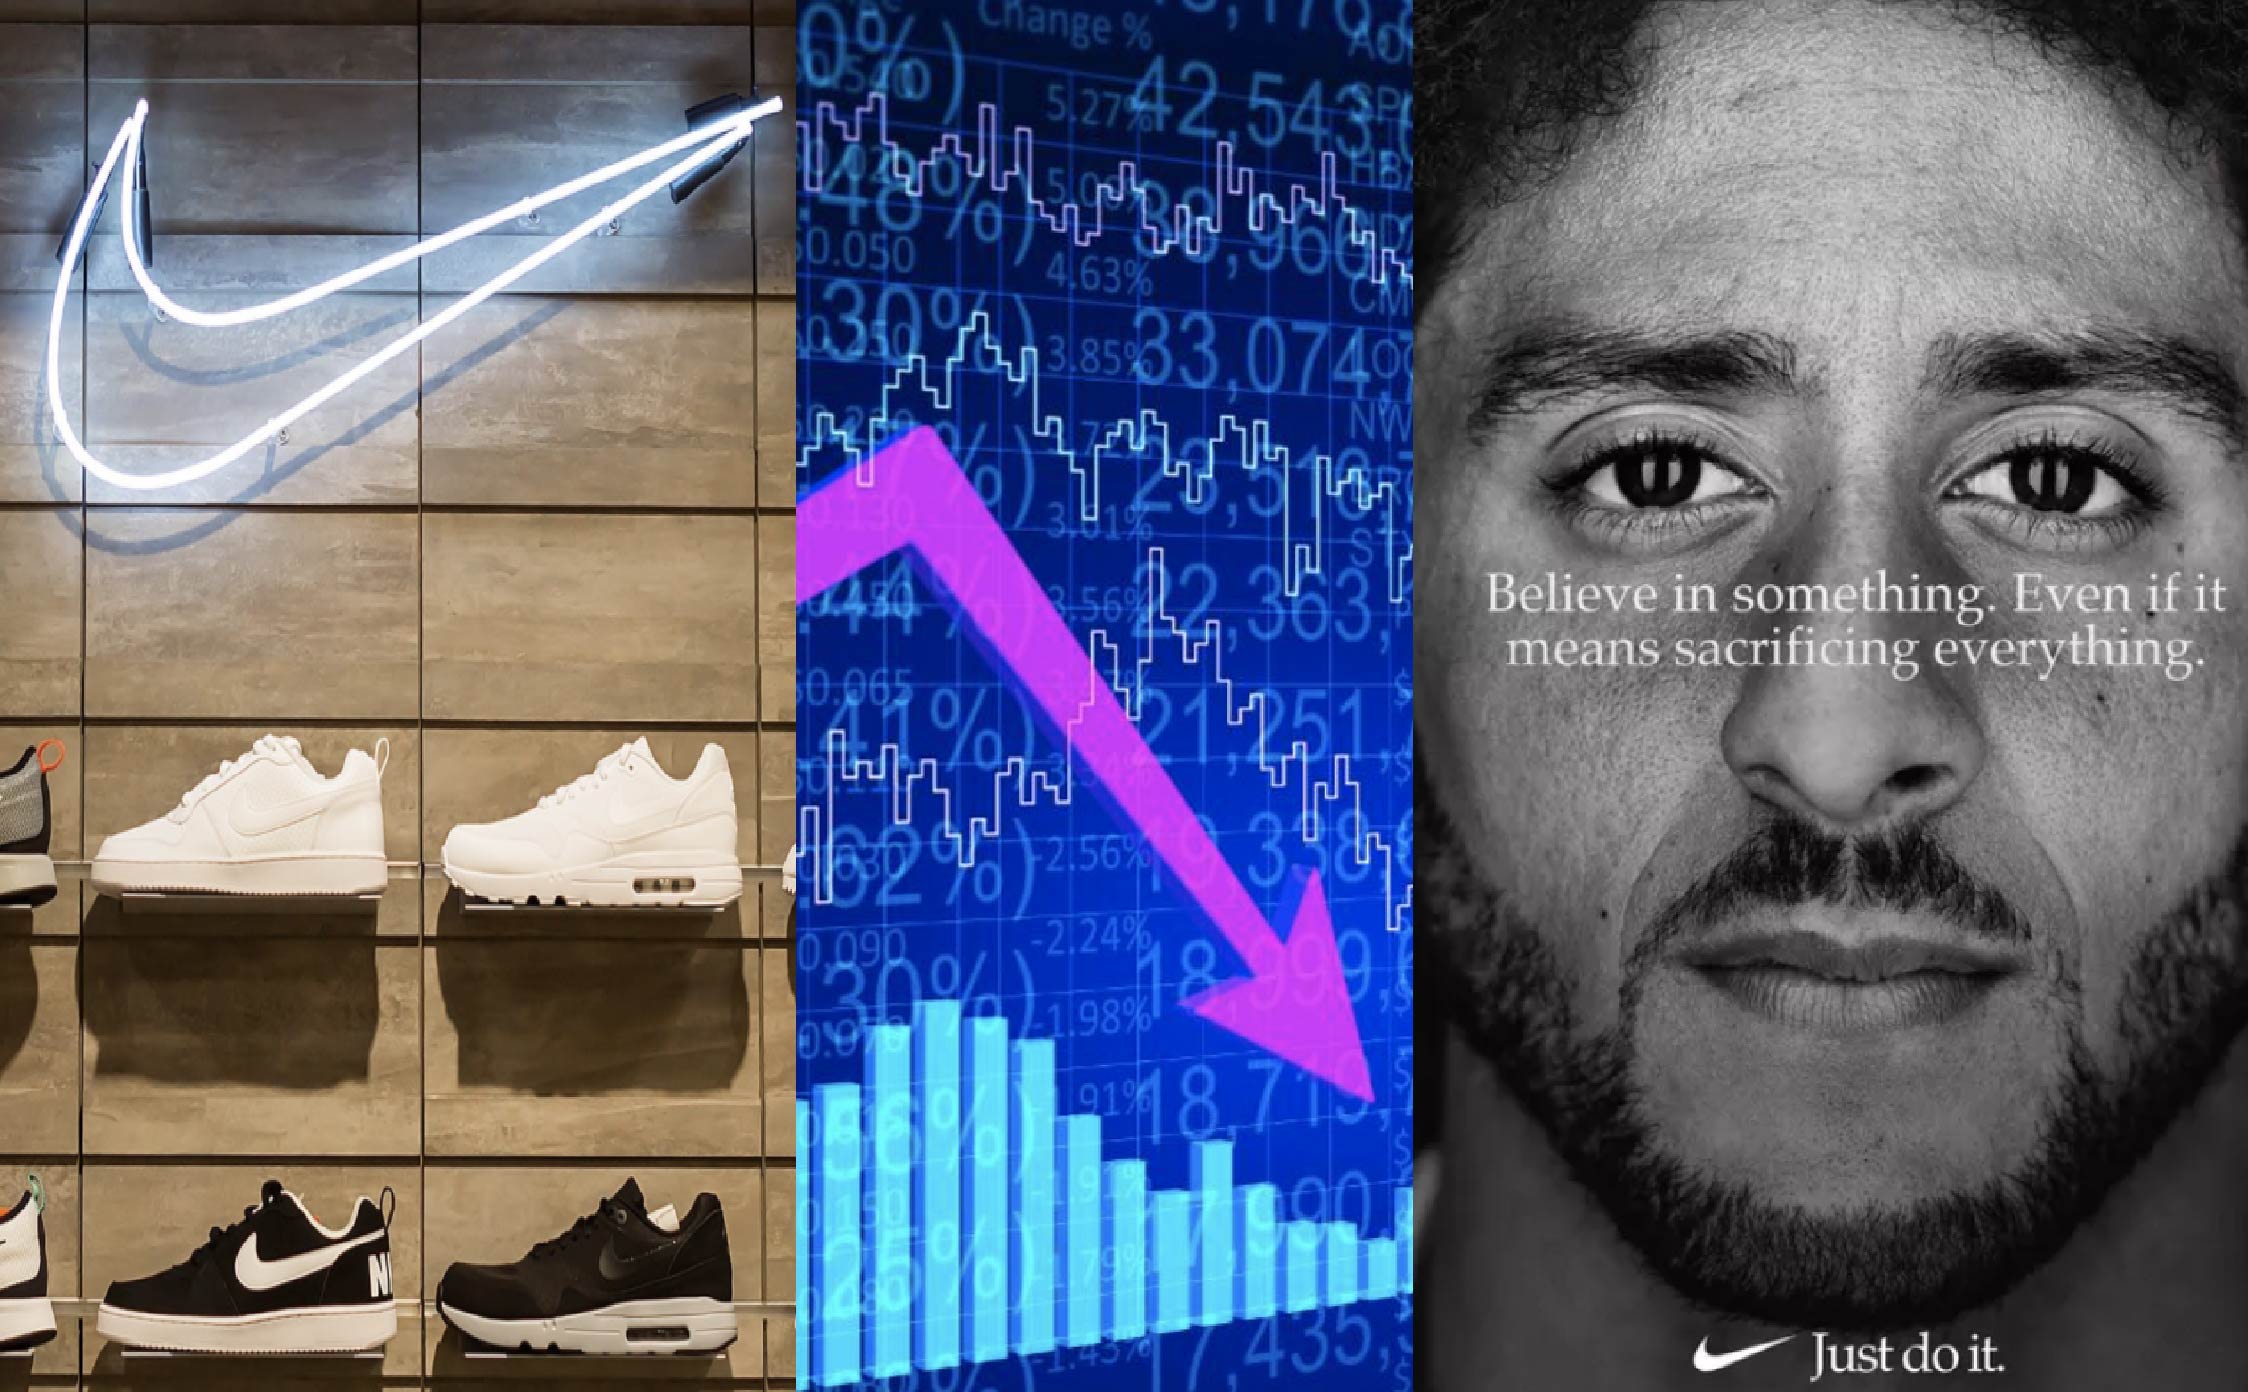 Report “Woke” NIKE Just Reported Staggering 790 Million Dollar Loss